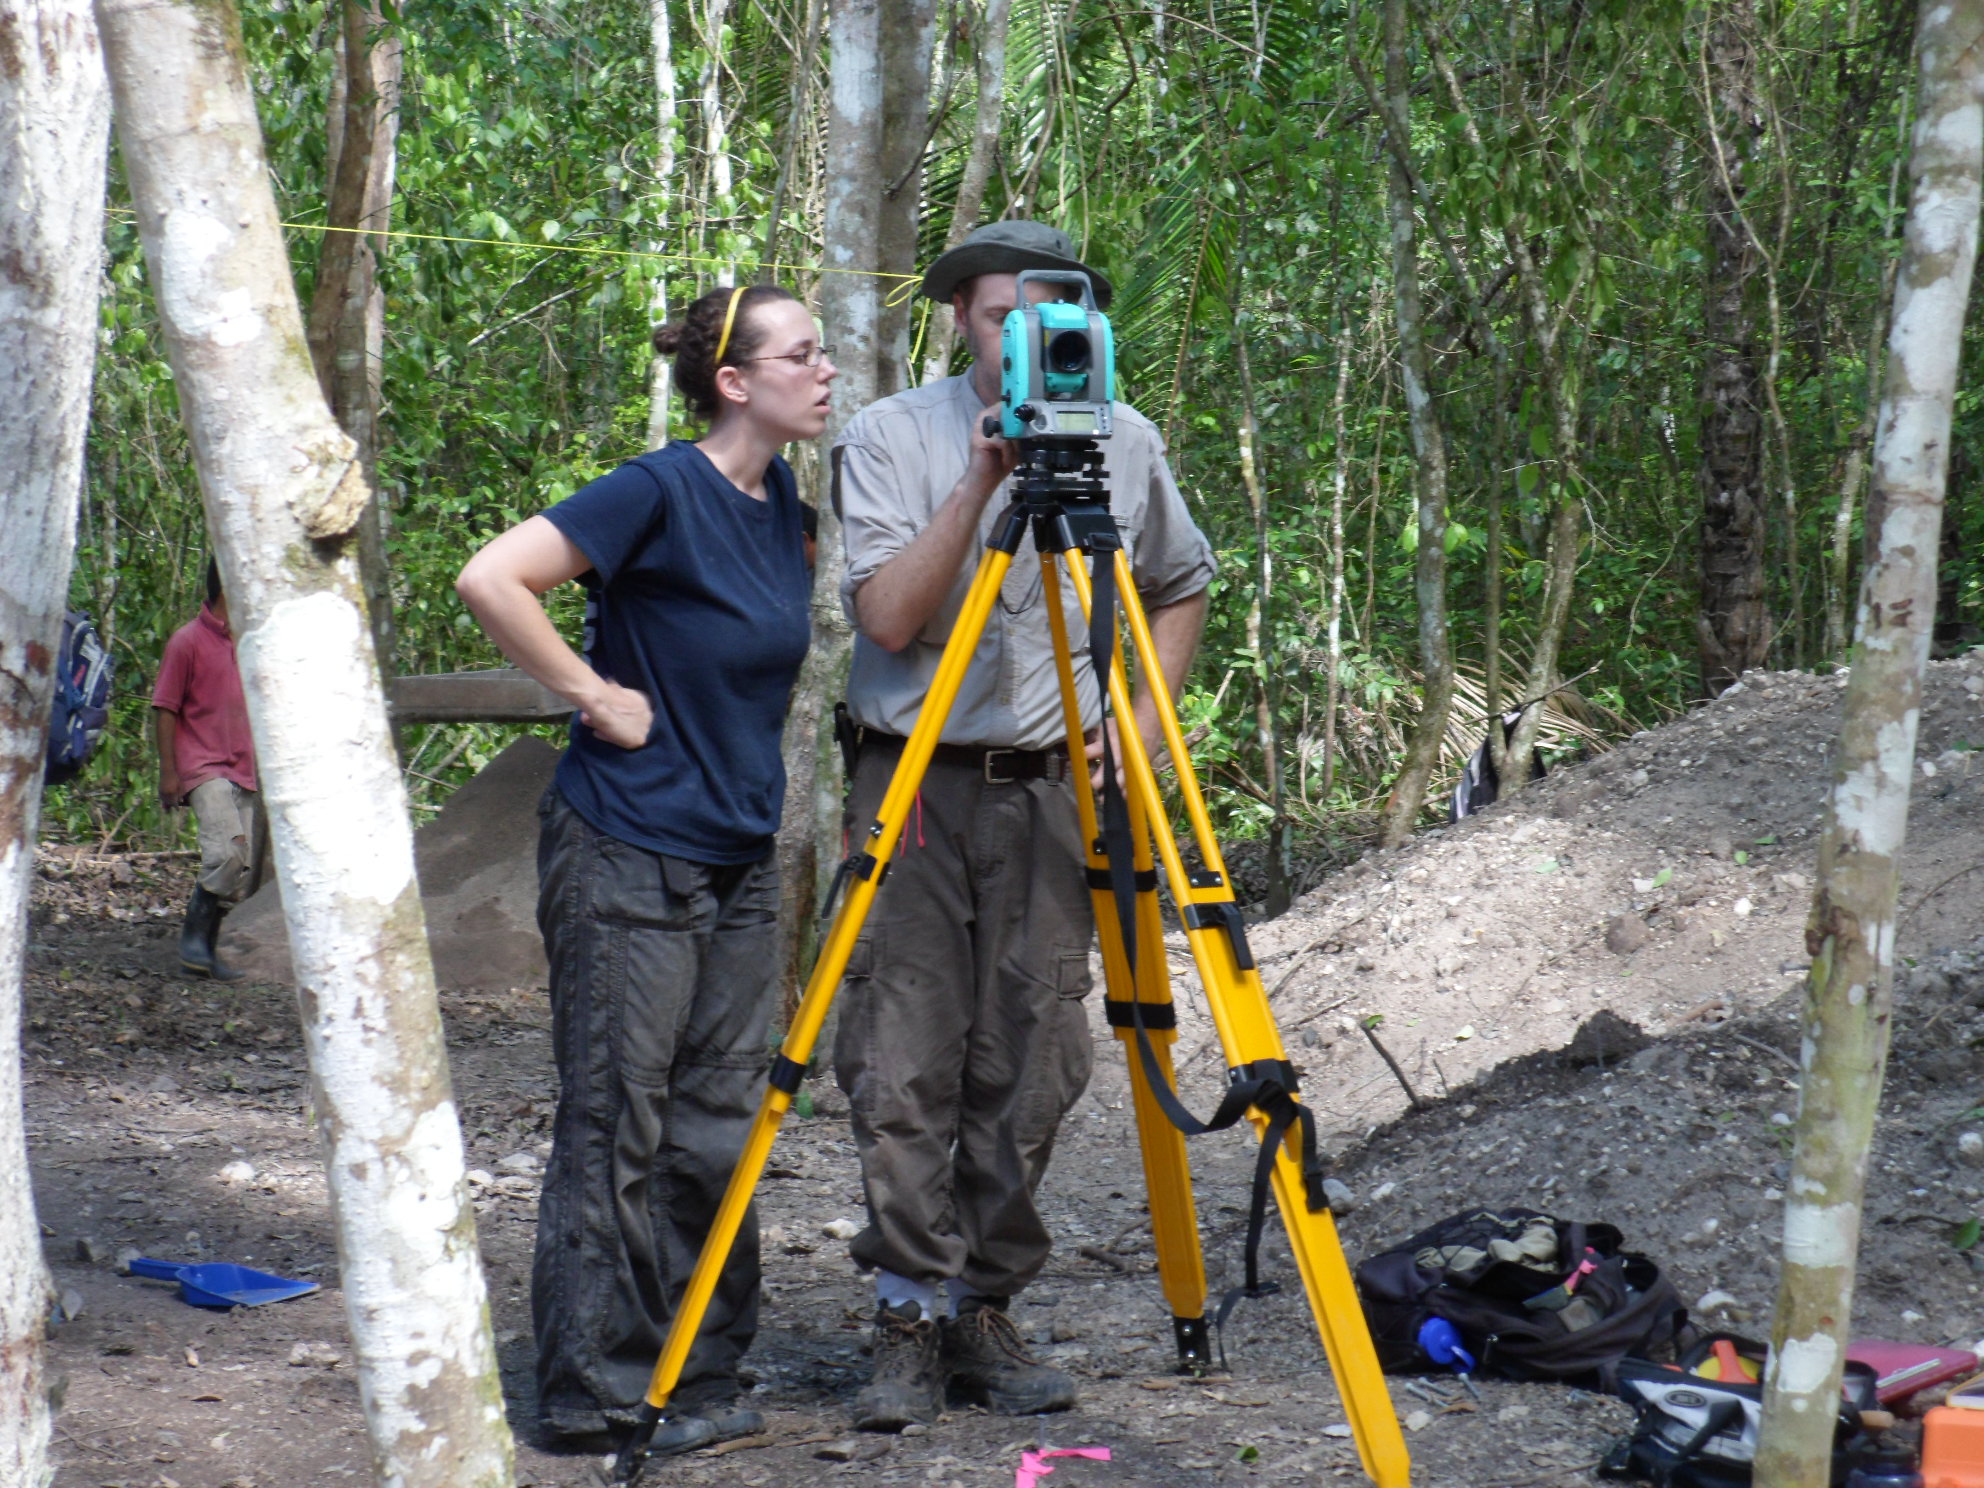 Leah and Jason working the theodolite